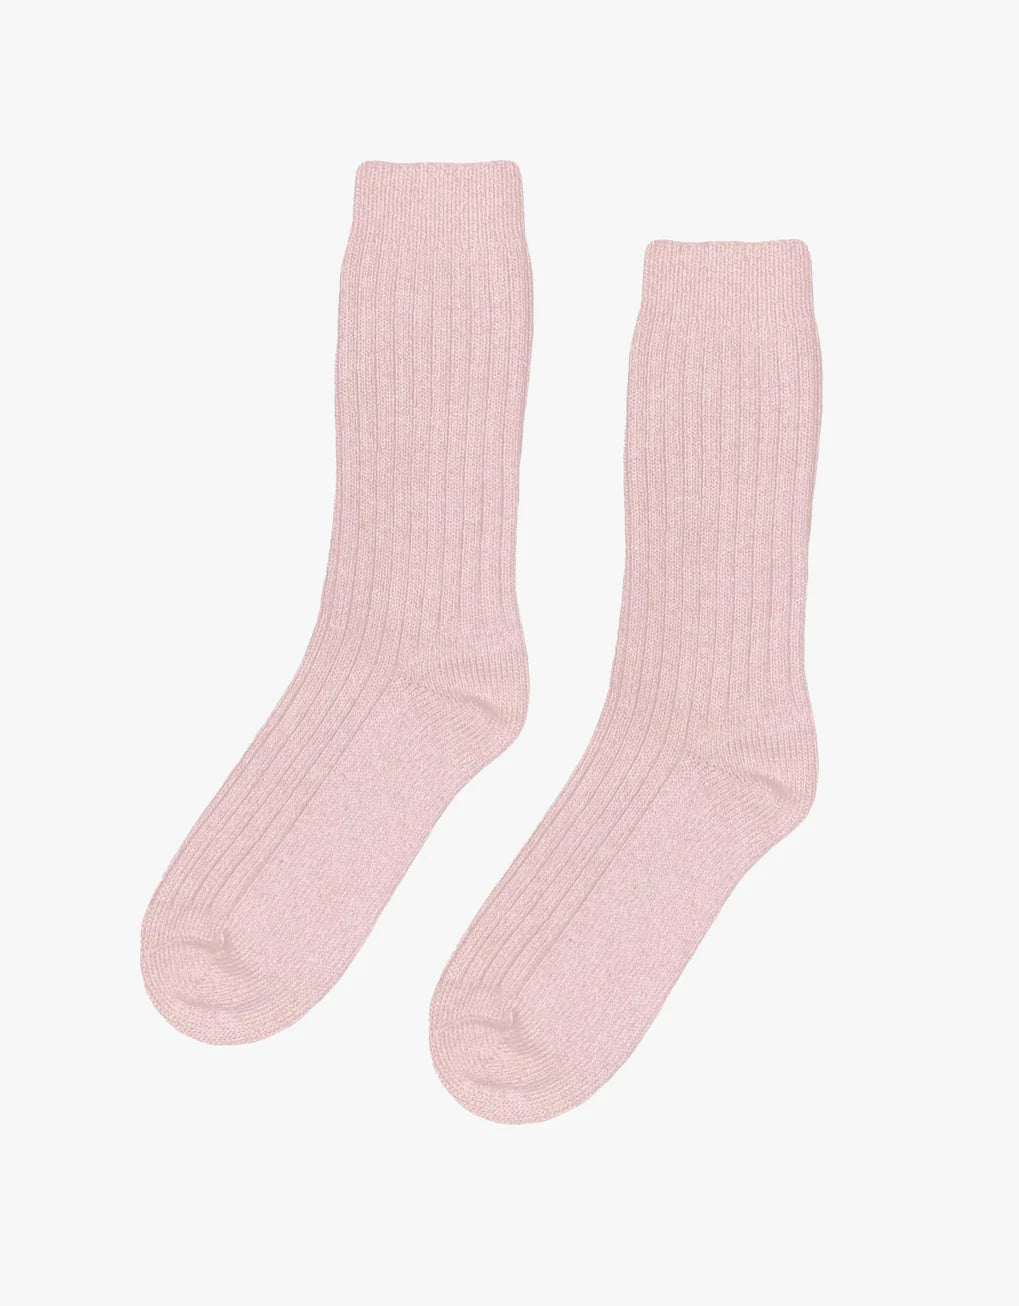 A pair of Colorful Standard Merino Wool Blend Socks on a white background.